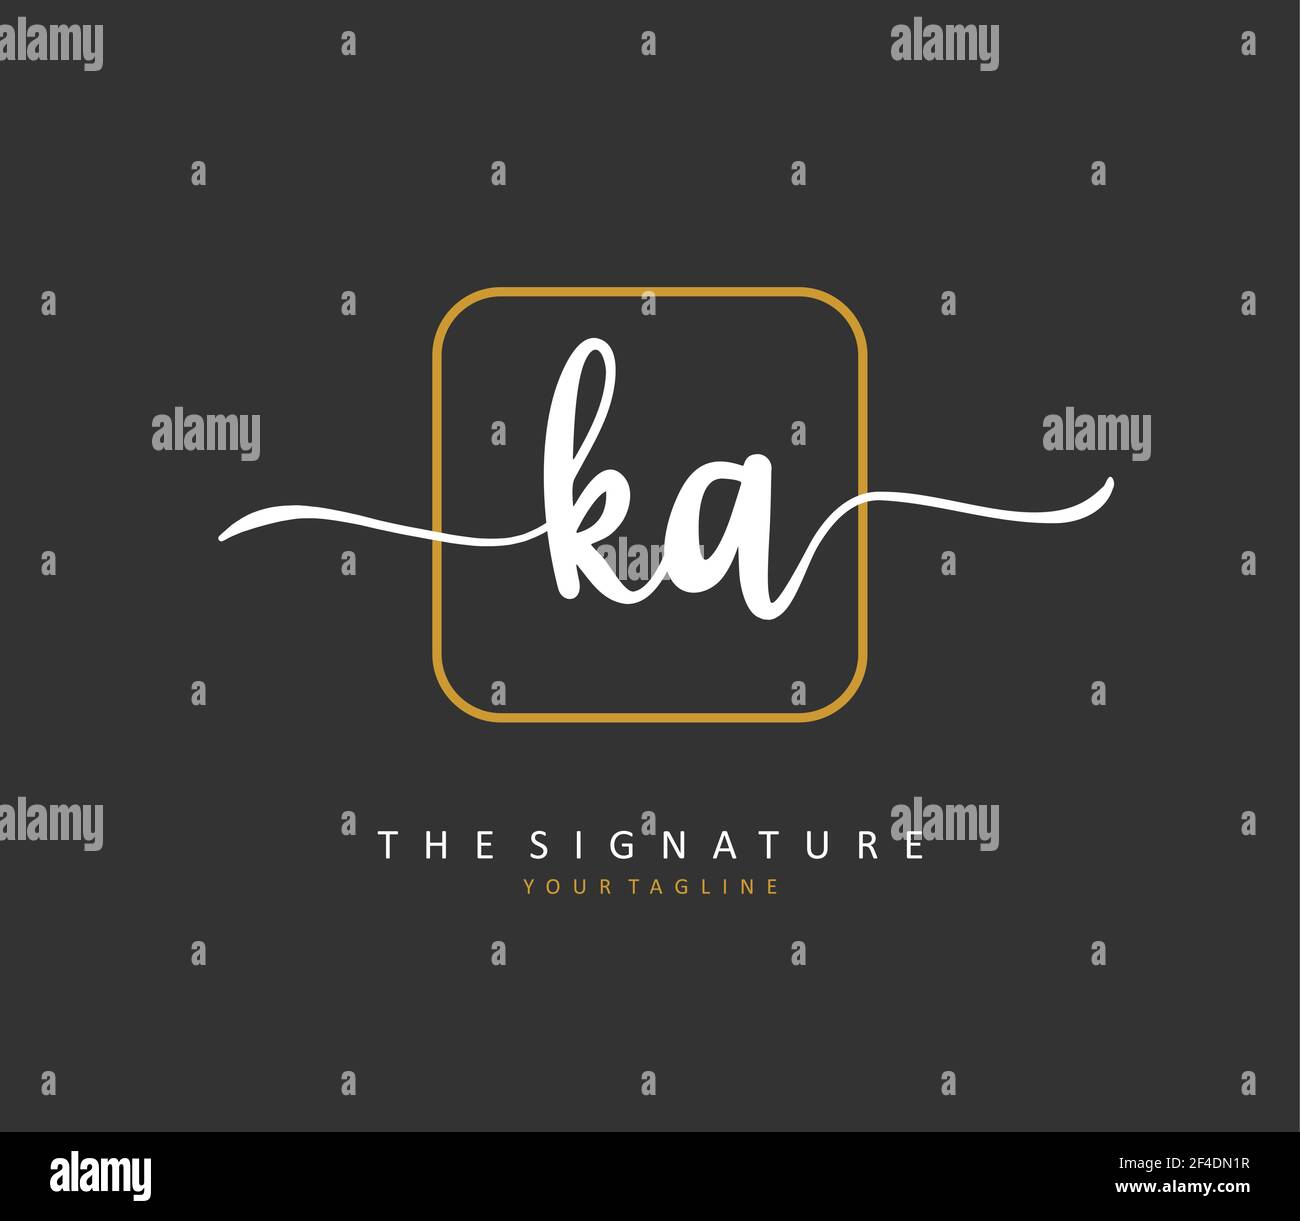 K A KA Initial letter handwriting and signature logo. A concept handwriting initial logo with template element. Stock Vector